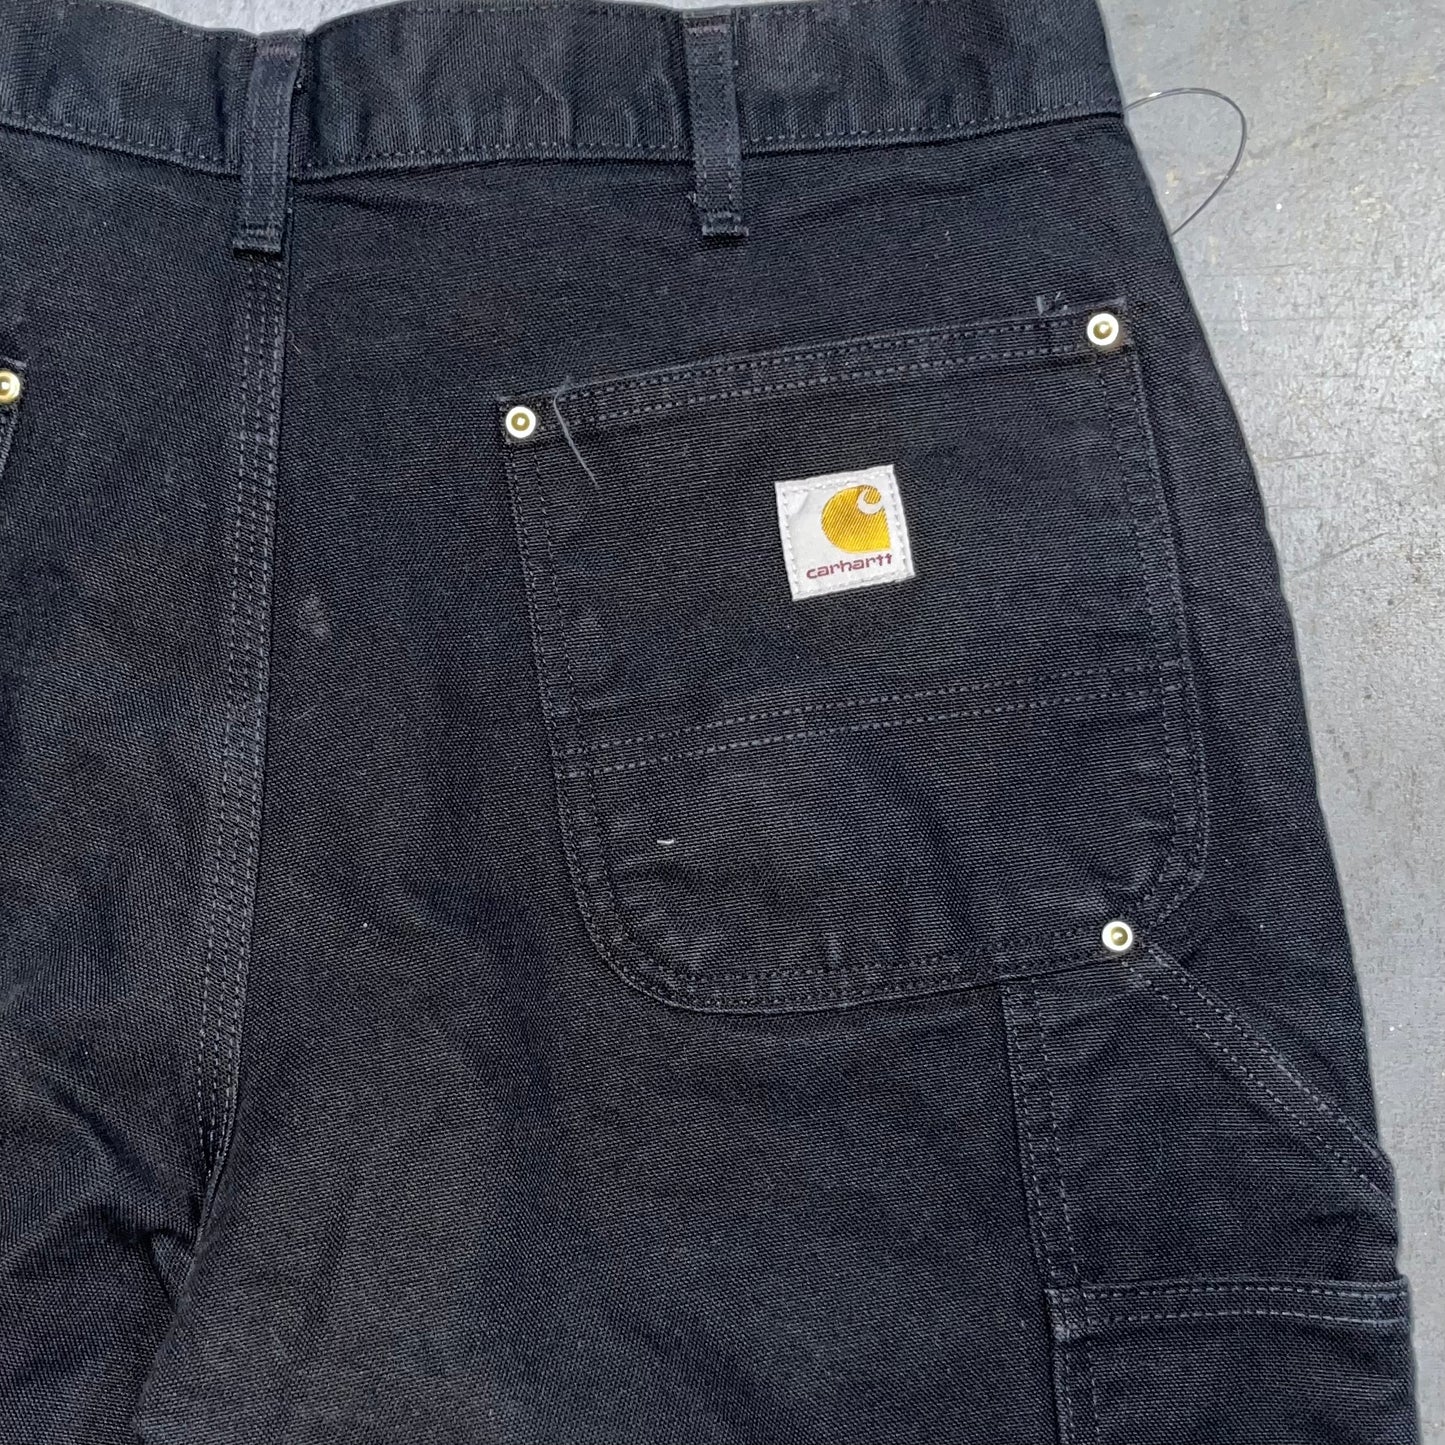 Carhartt Double-Knee Loose Fit Pants. 36x34